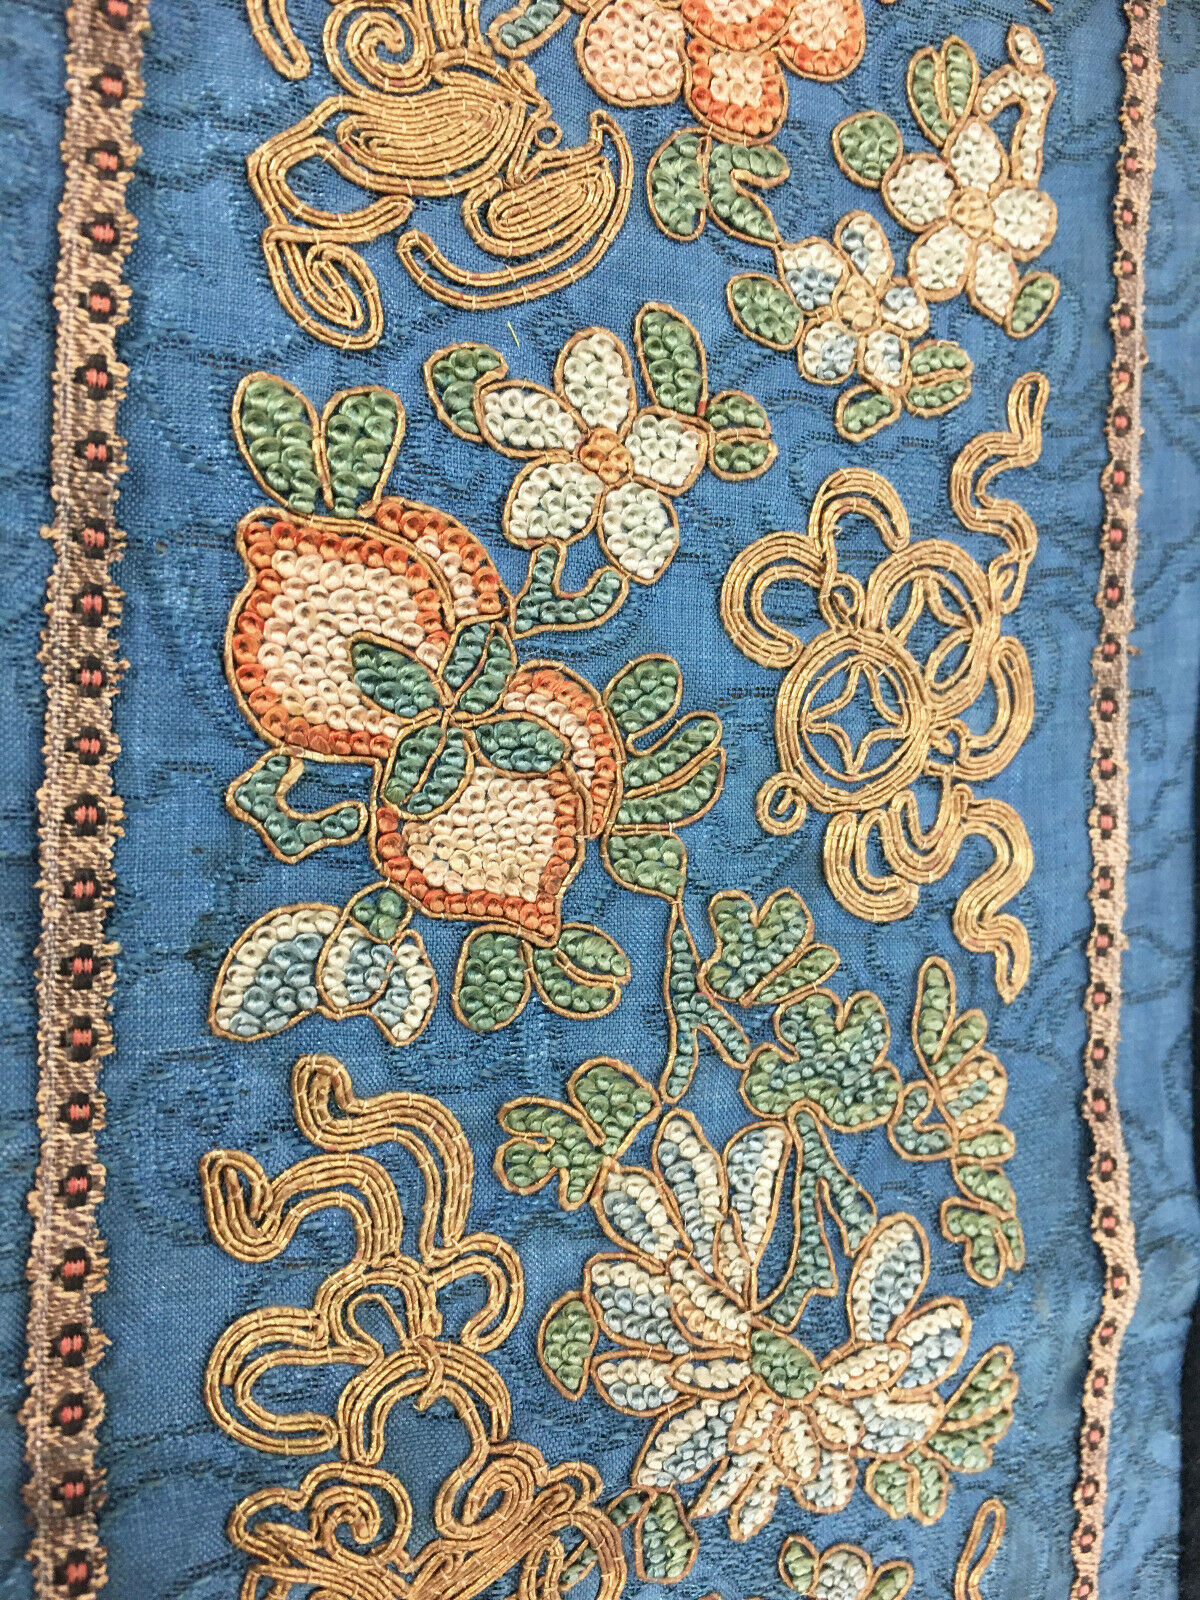 Antique Chinese Embroider Panel Cloud Gauze Forbidden Stitch Gold Couched Thread